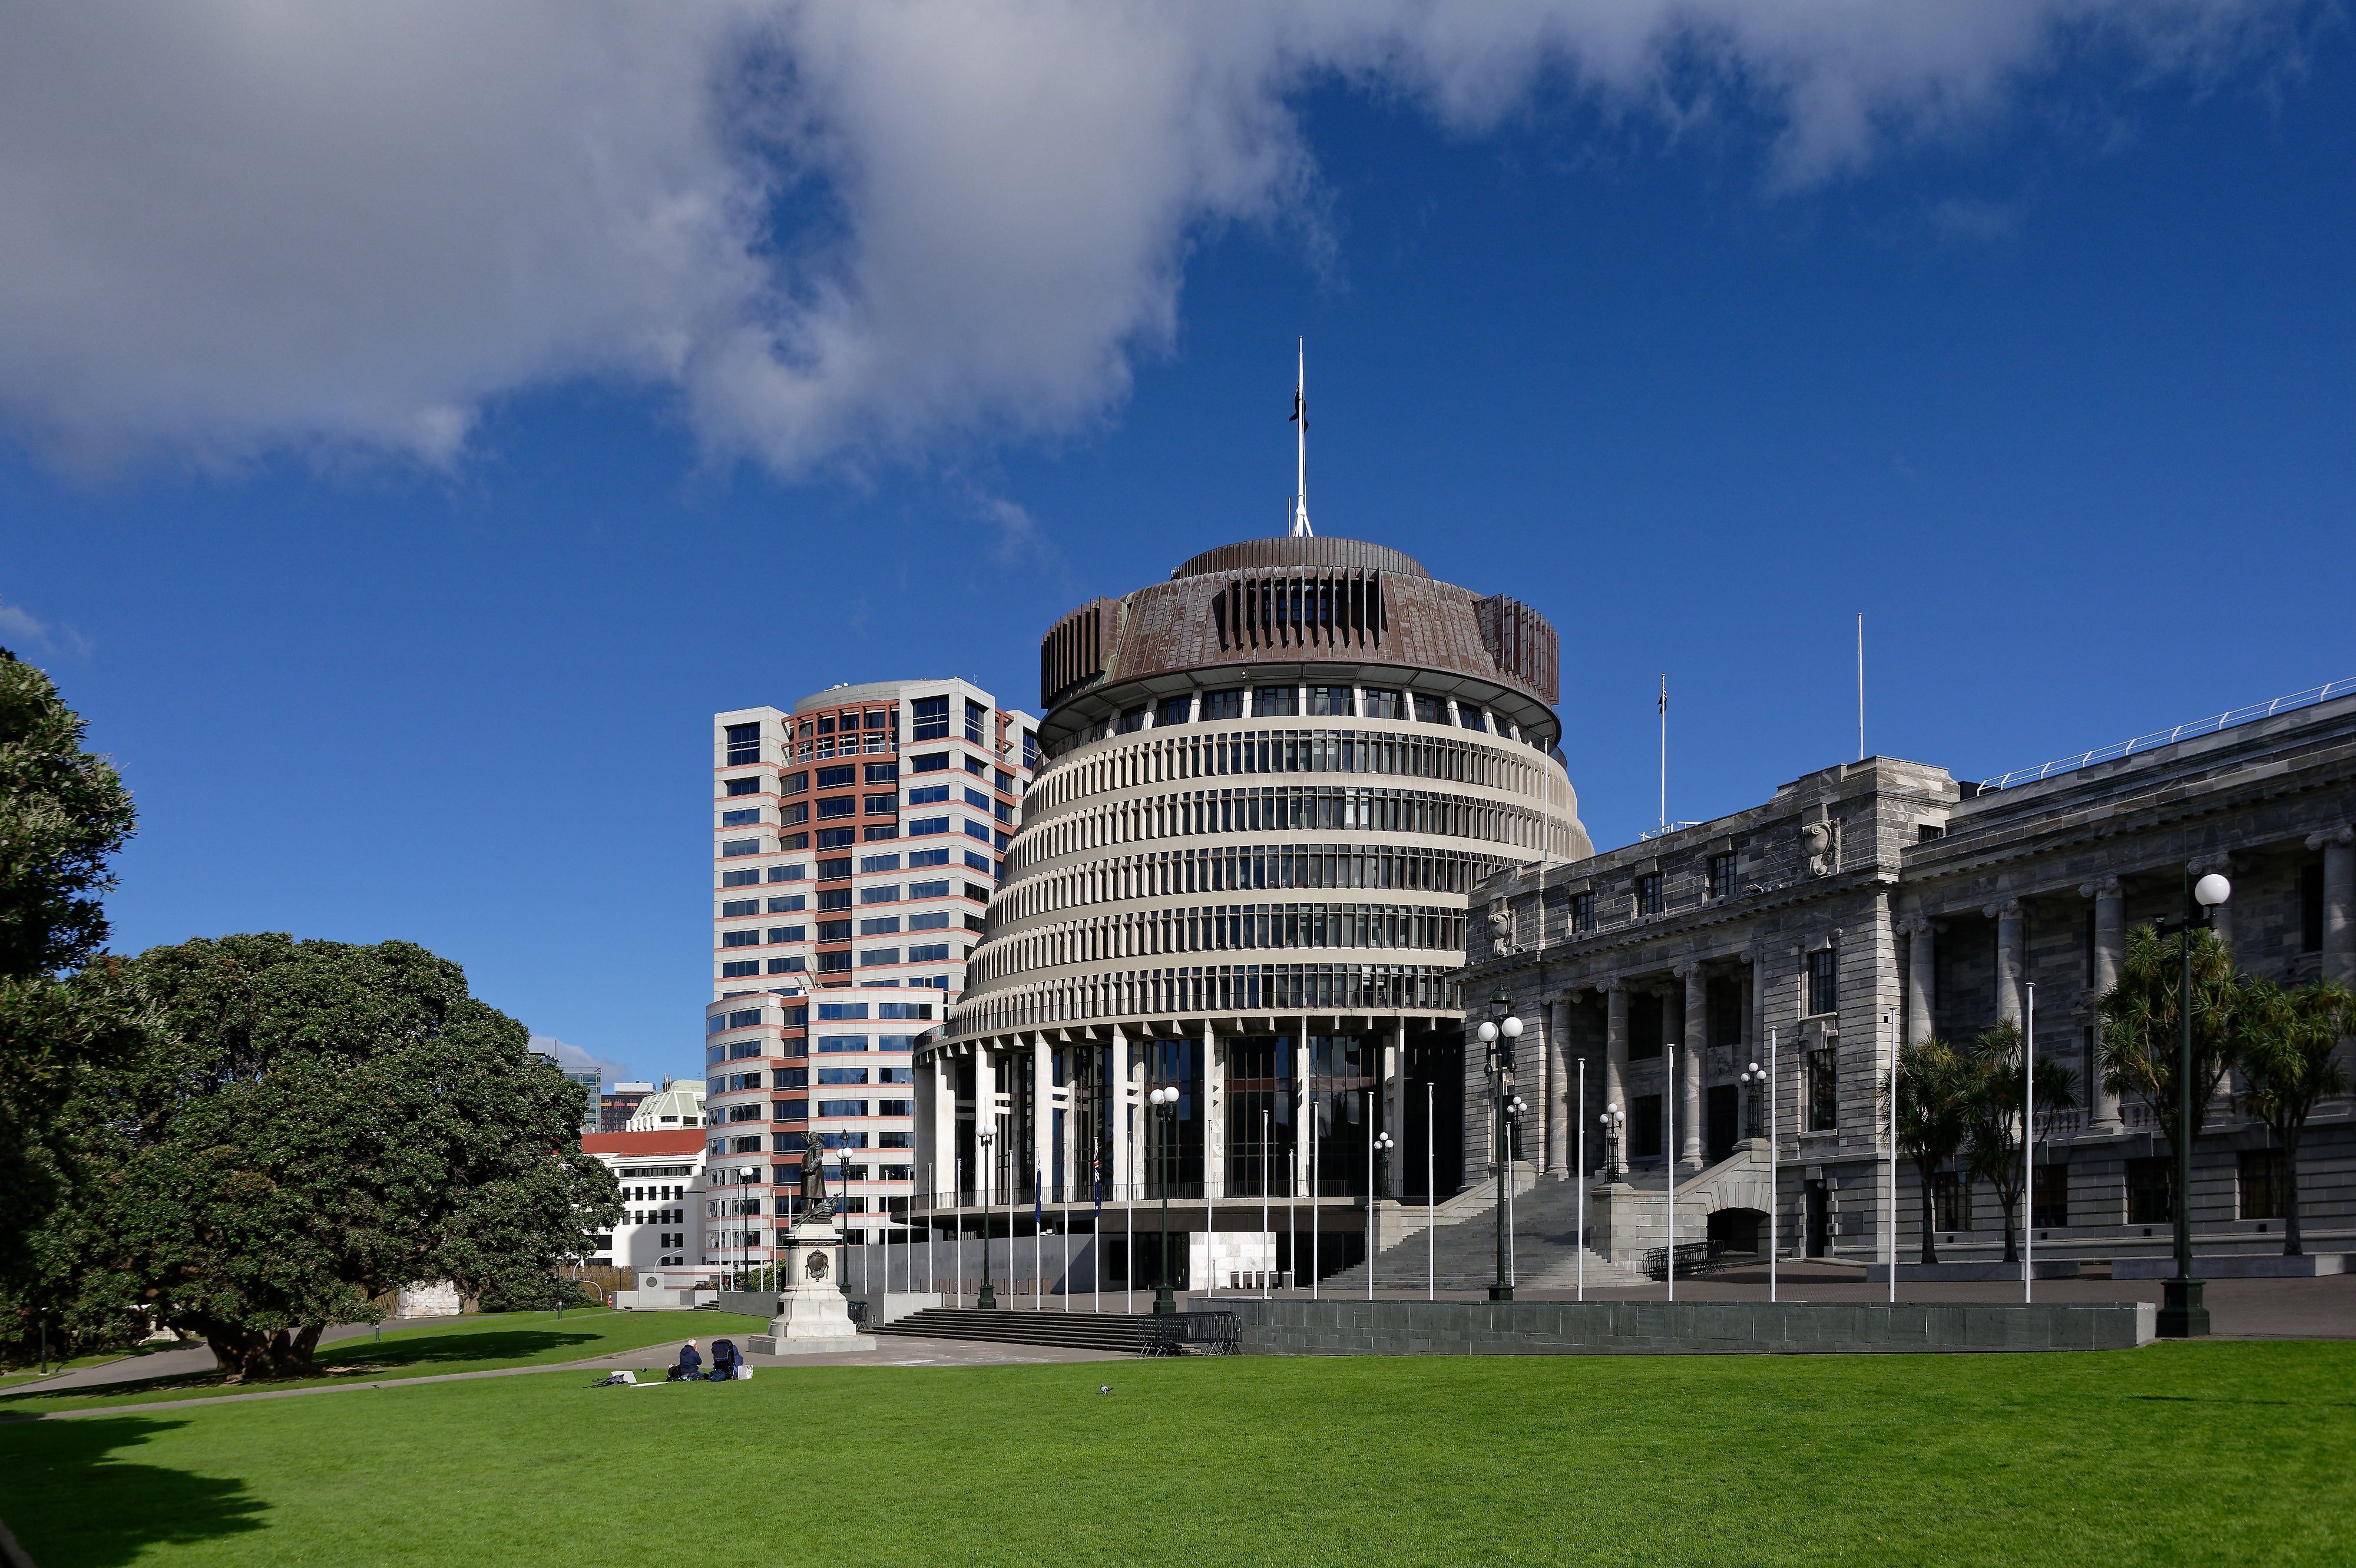 The Beehive, a parliamentary building, is pictured in Wellington, New Zealand.